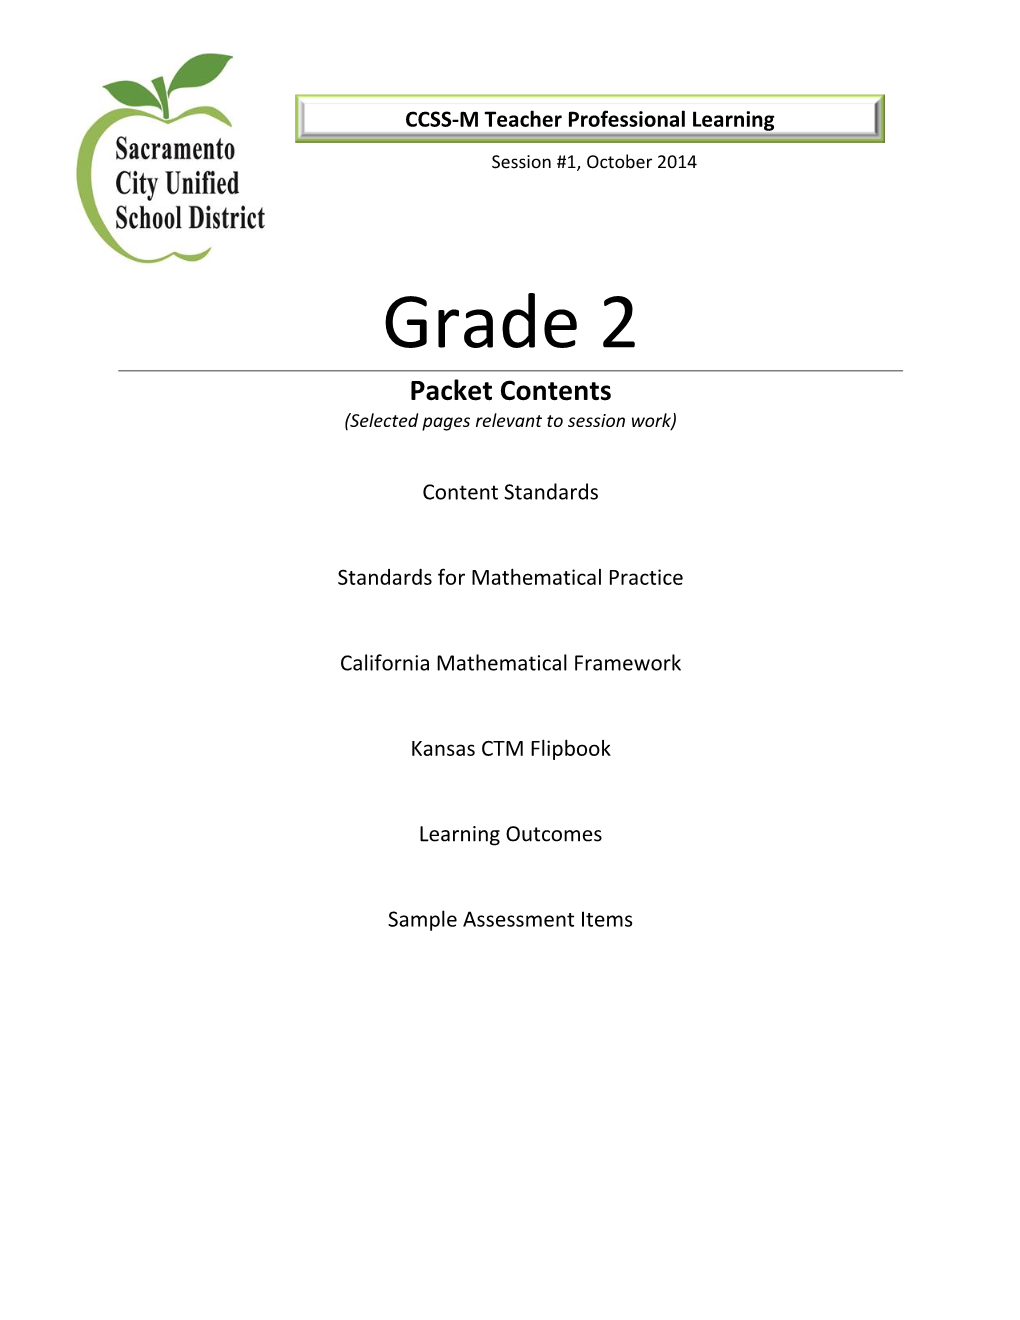 Grade 2 Packet Contents (Selected Pages Relevant to Session Work)